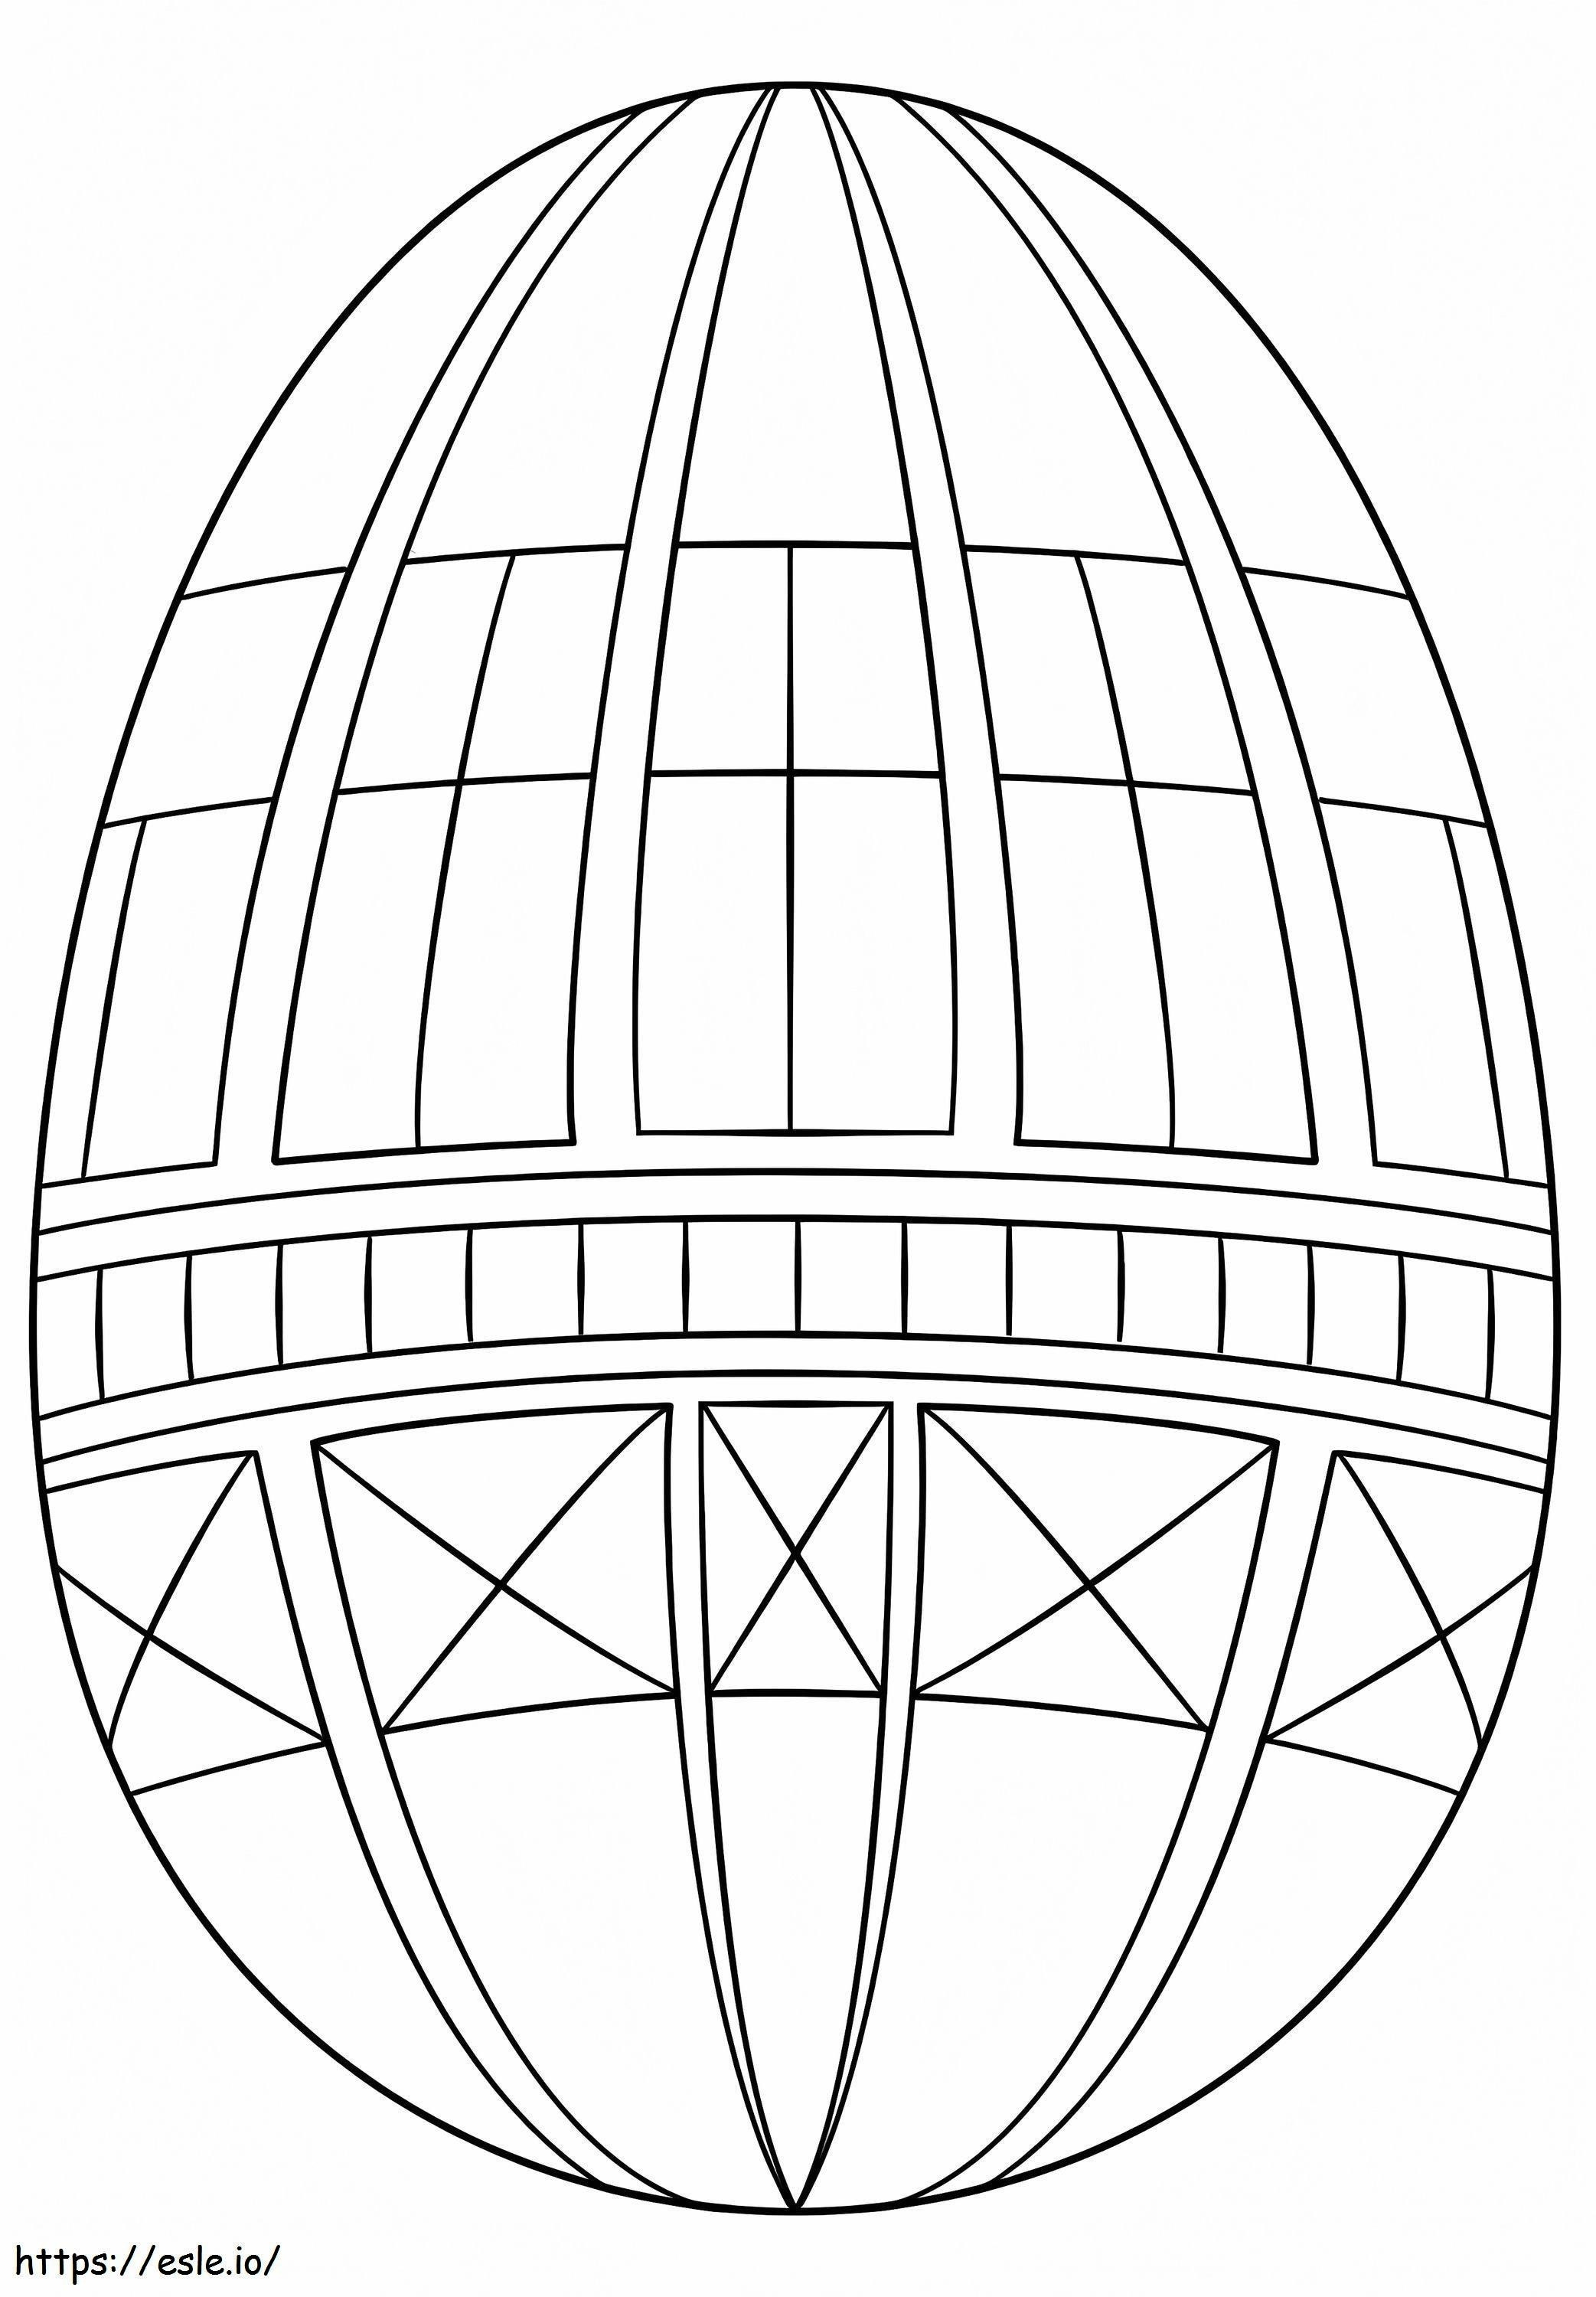 Wonderful Easter Egg 2 coloring page